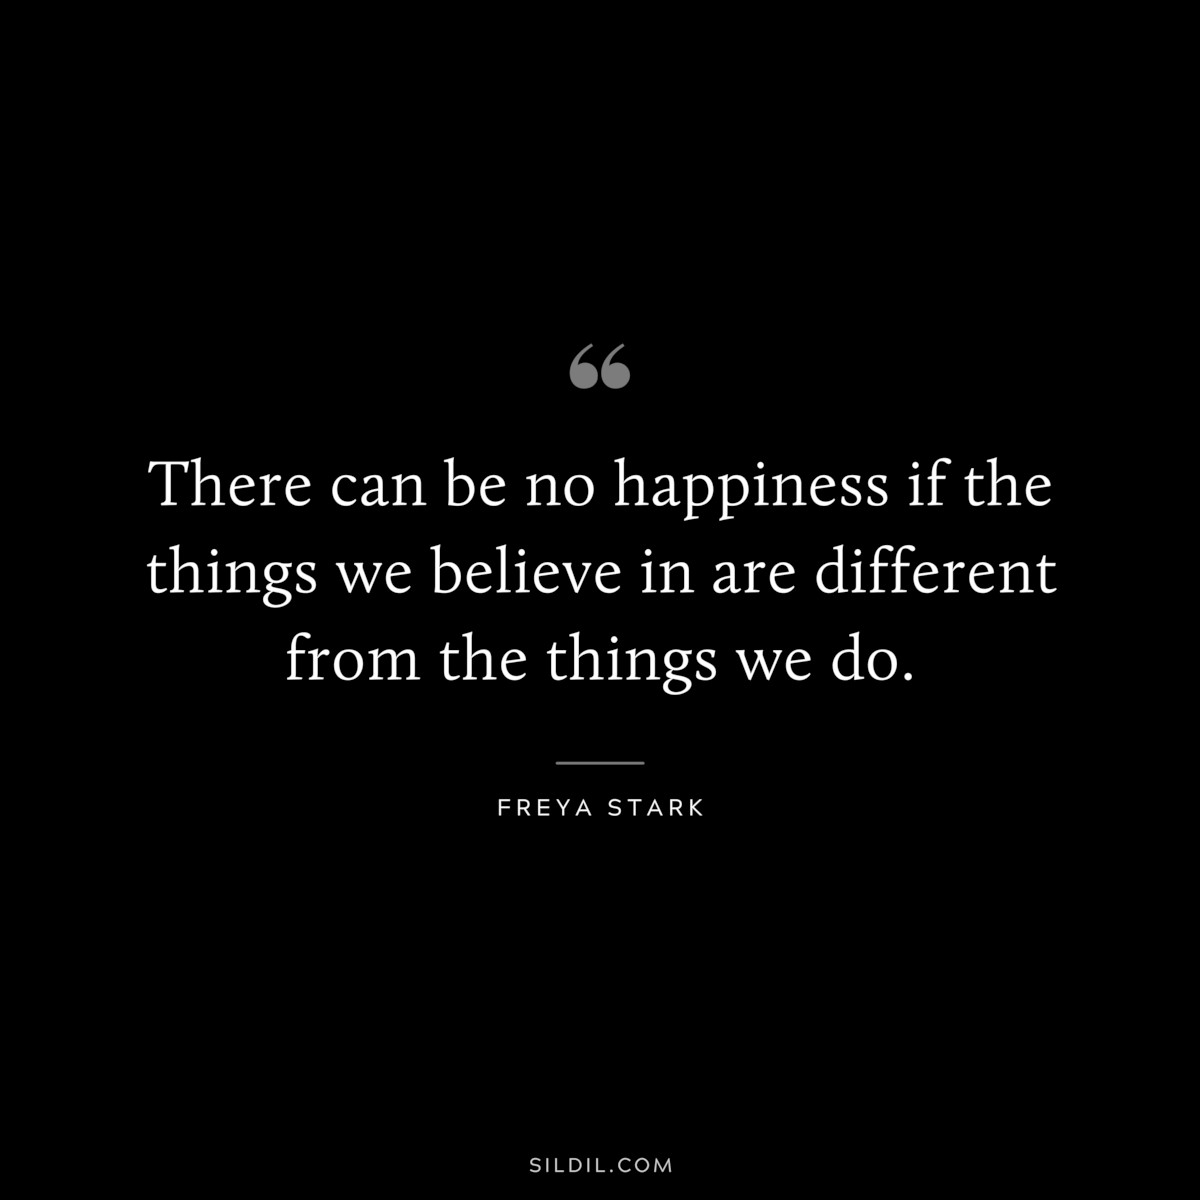 There can be no happiness if the things we believe in are different from the things we do. ― Freya Stark